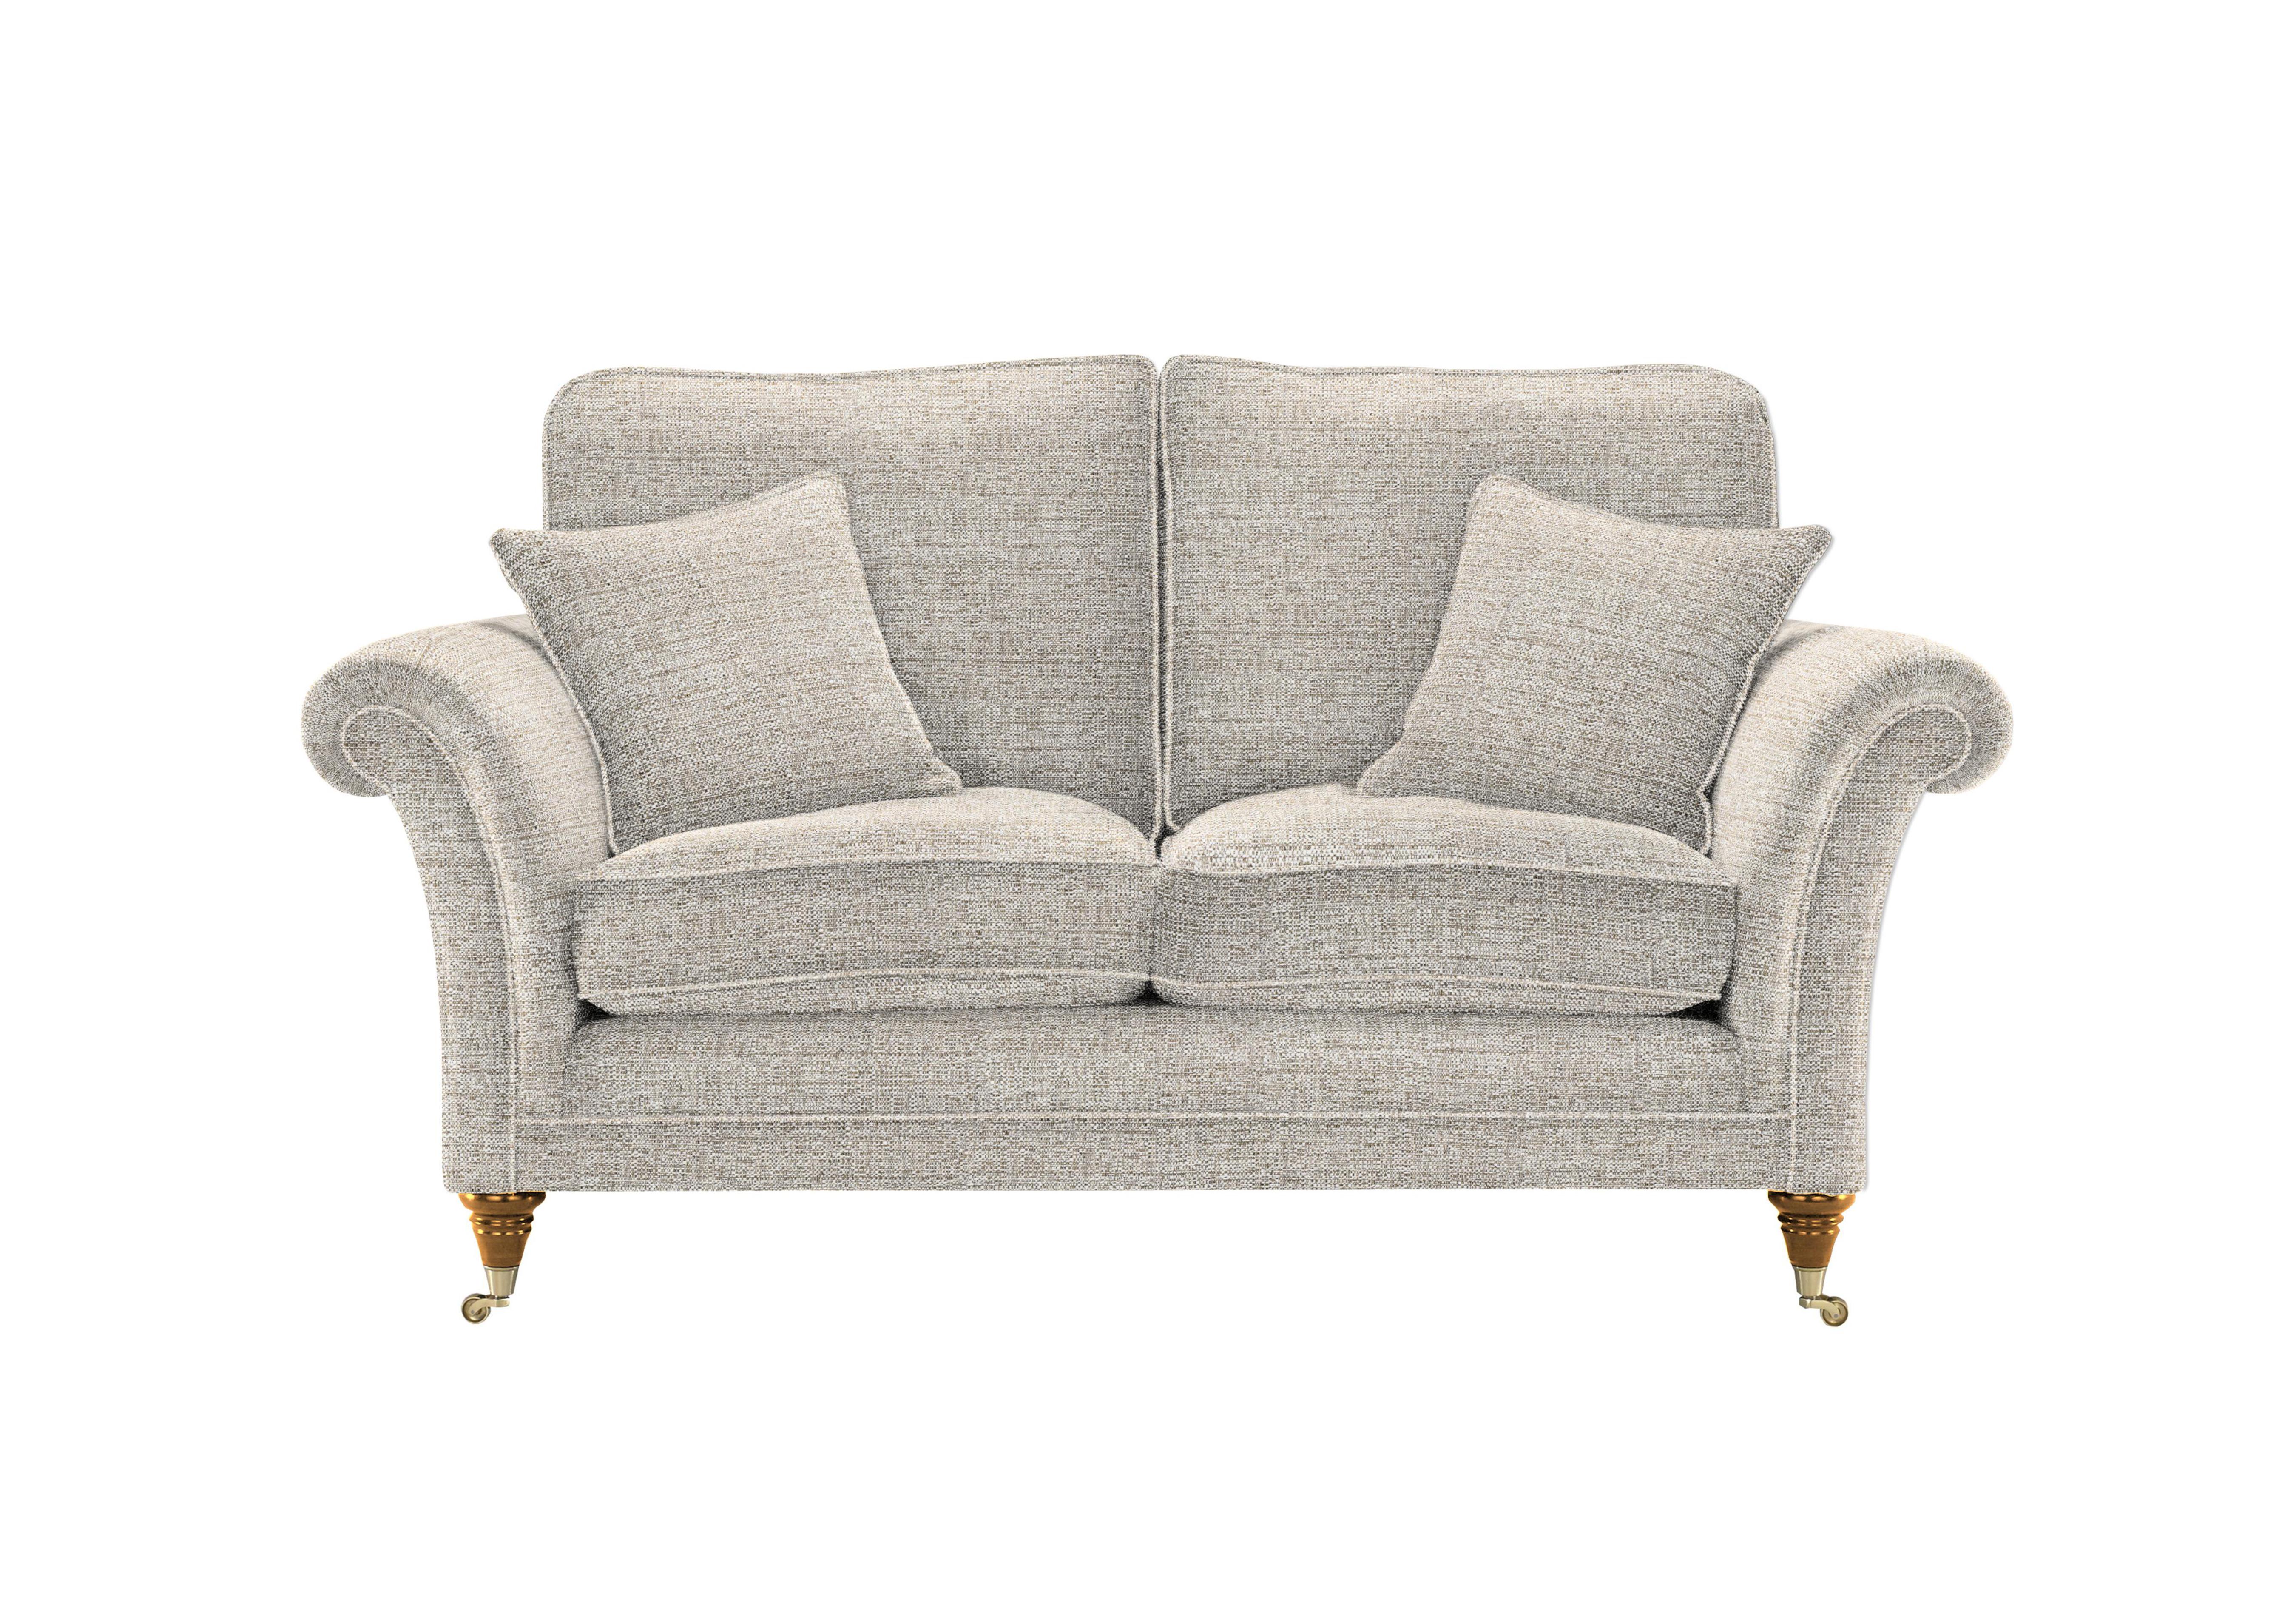 Burghley 2 Seater Fabric Sofa in 1300-0059 Caledonian Pebble on Furniture Village